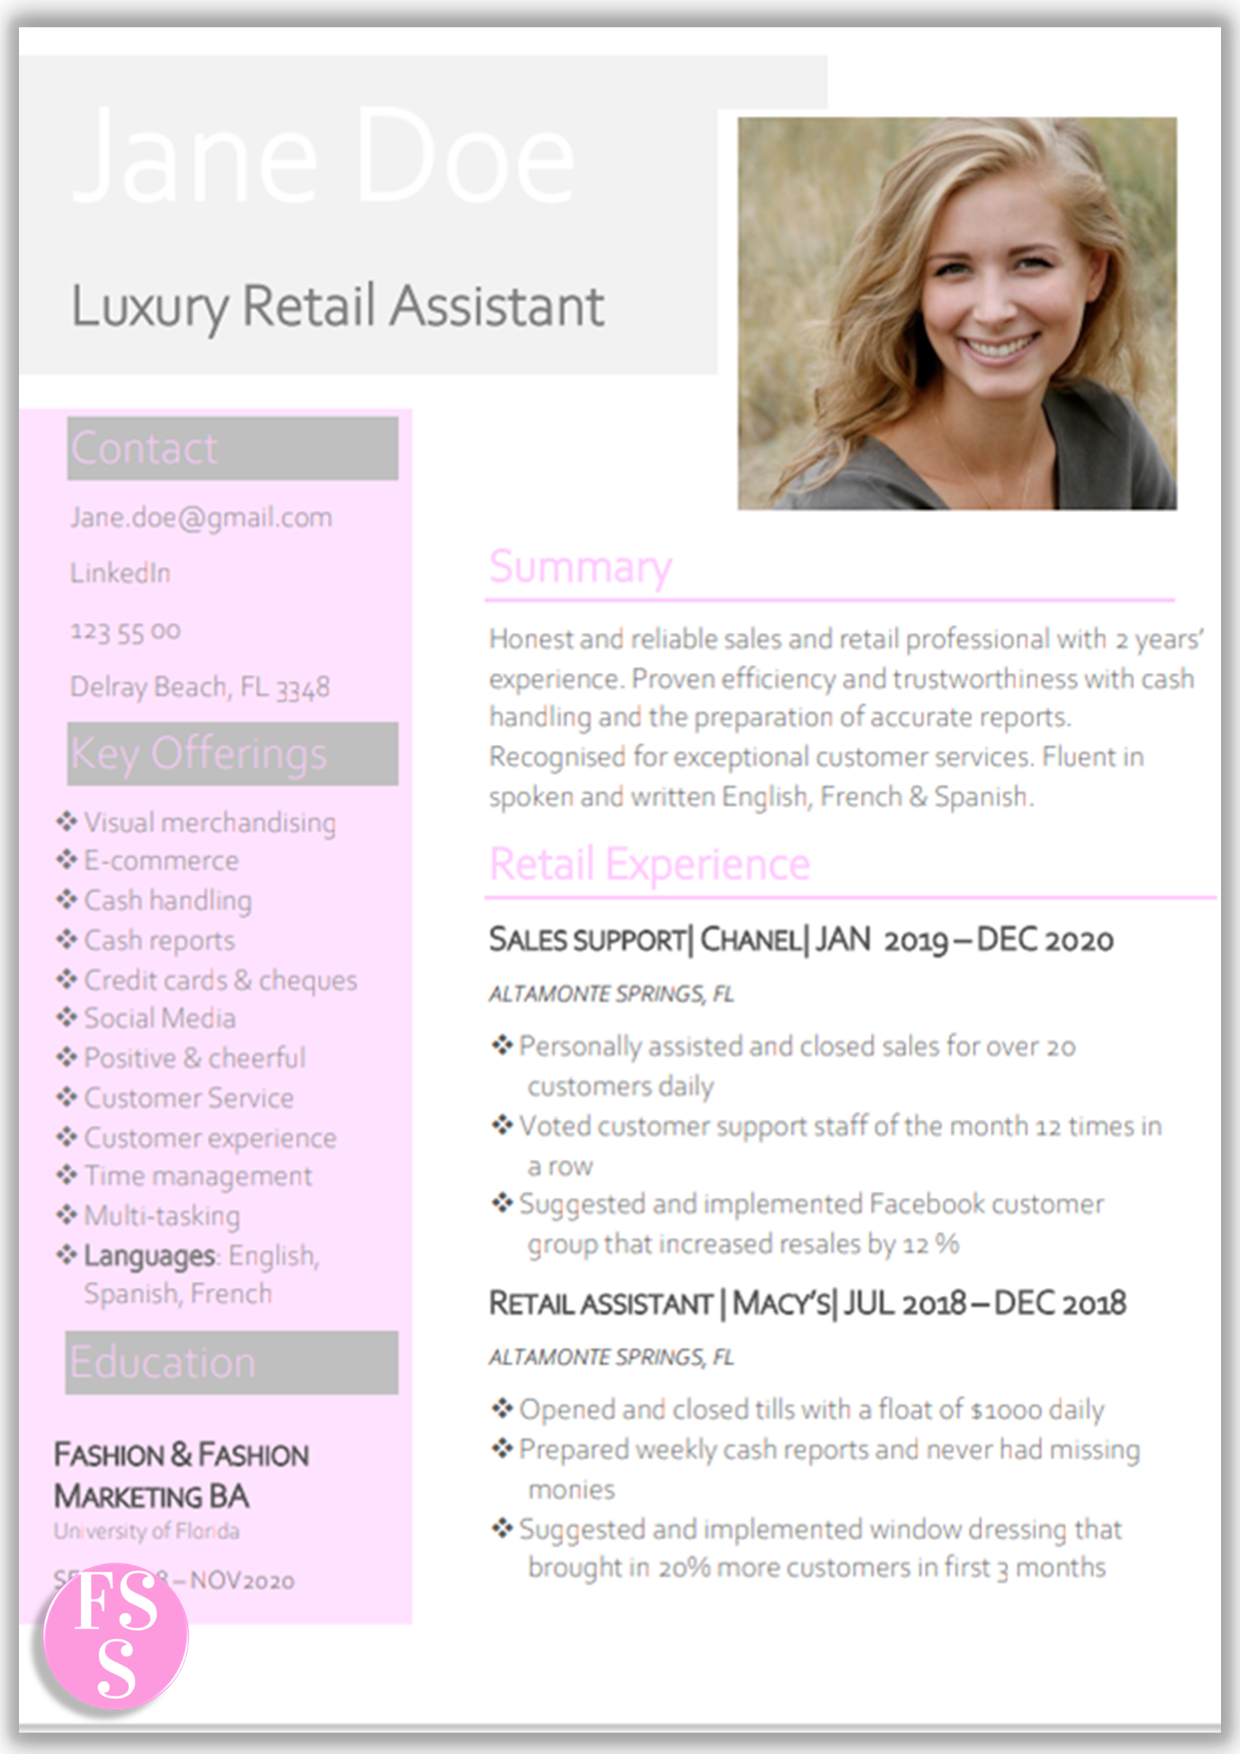 Need creative cv ideas?  Use this High End Fashion Retail Resume + cover letter template. Resume design & layout carefully crafted to blow recruiters away. 